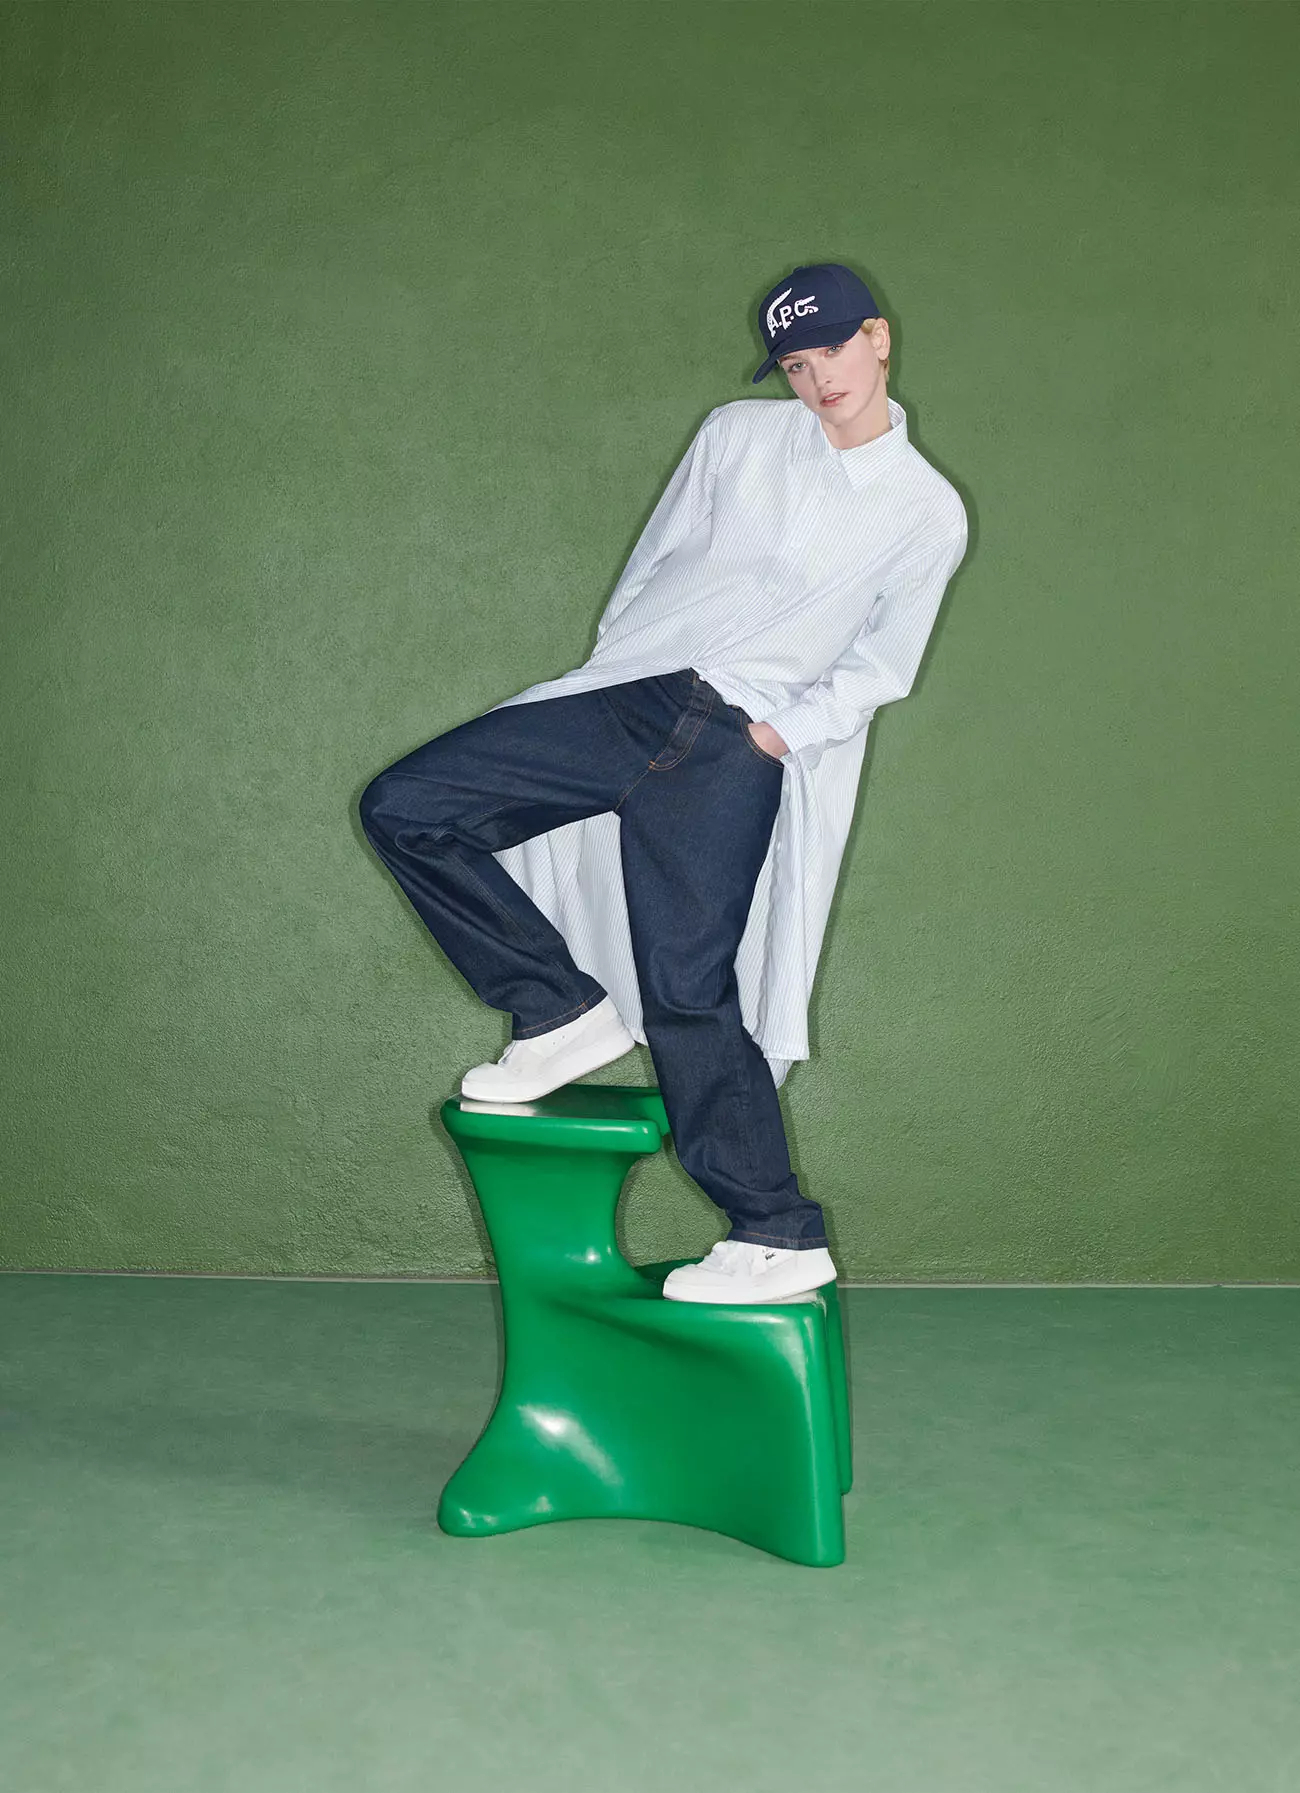 Lacoste x A.P.C., a sportswear collab with a 90's spirit that looks awesome